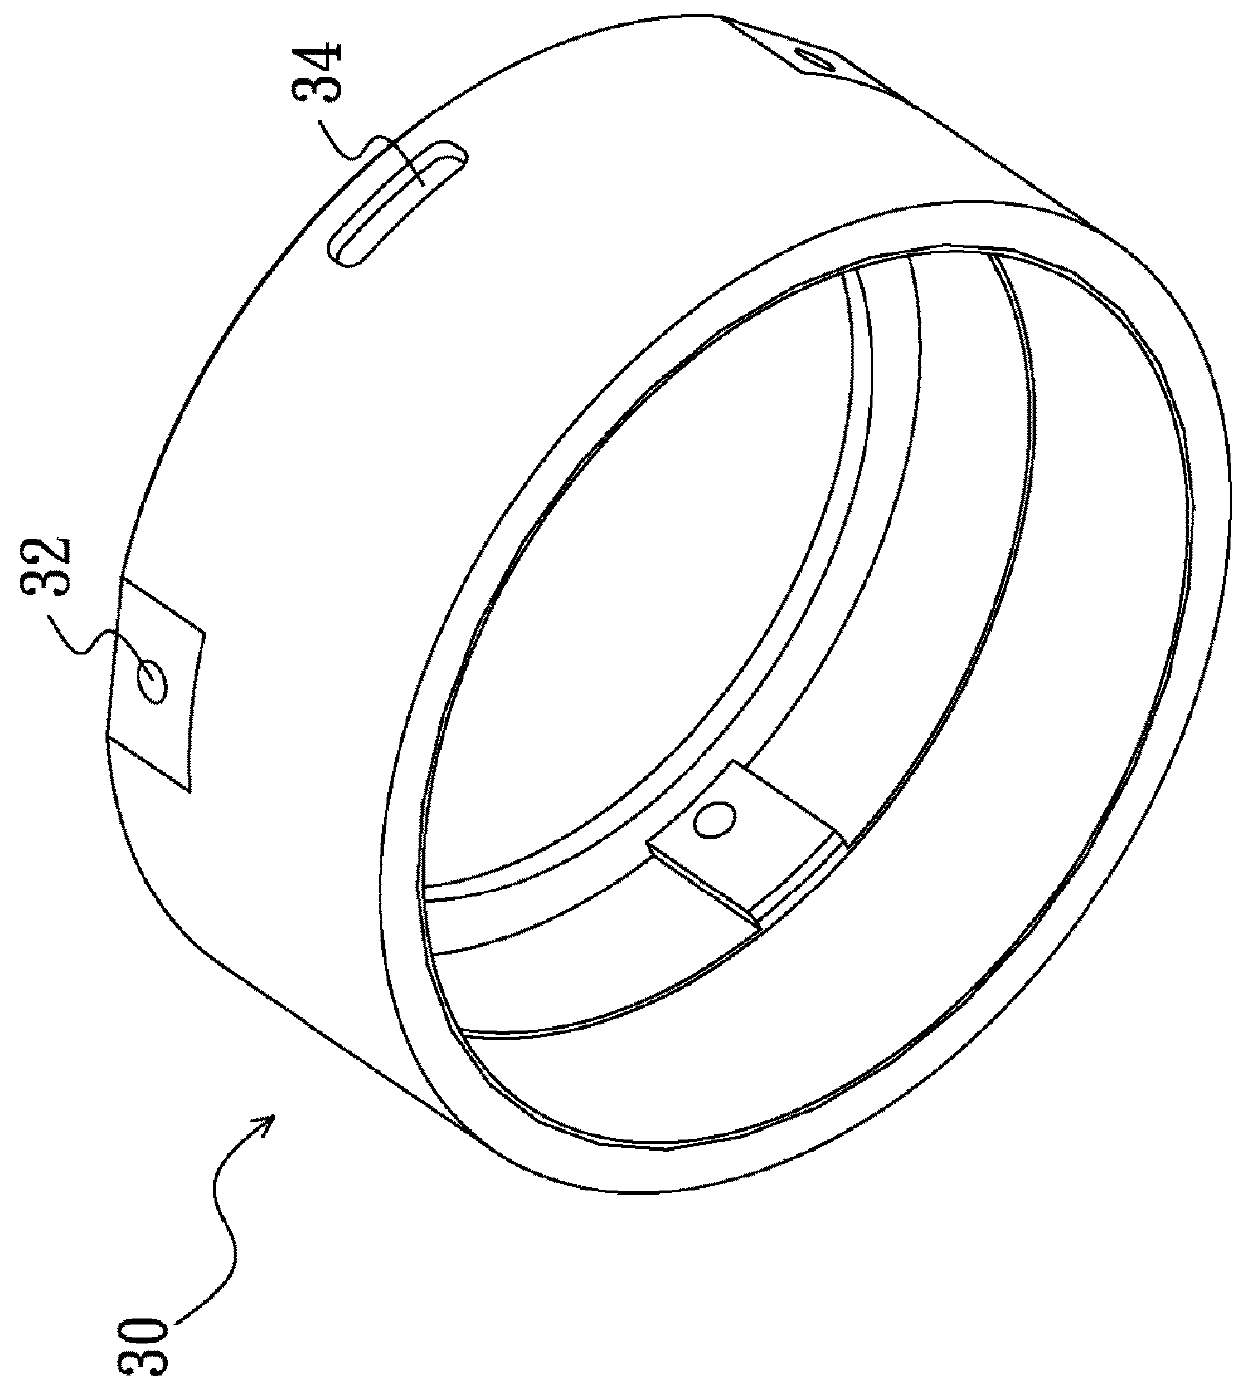 Ocular Structure for Observation Apparatus